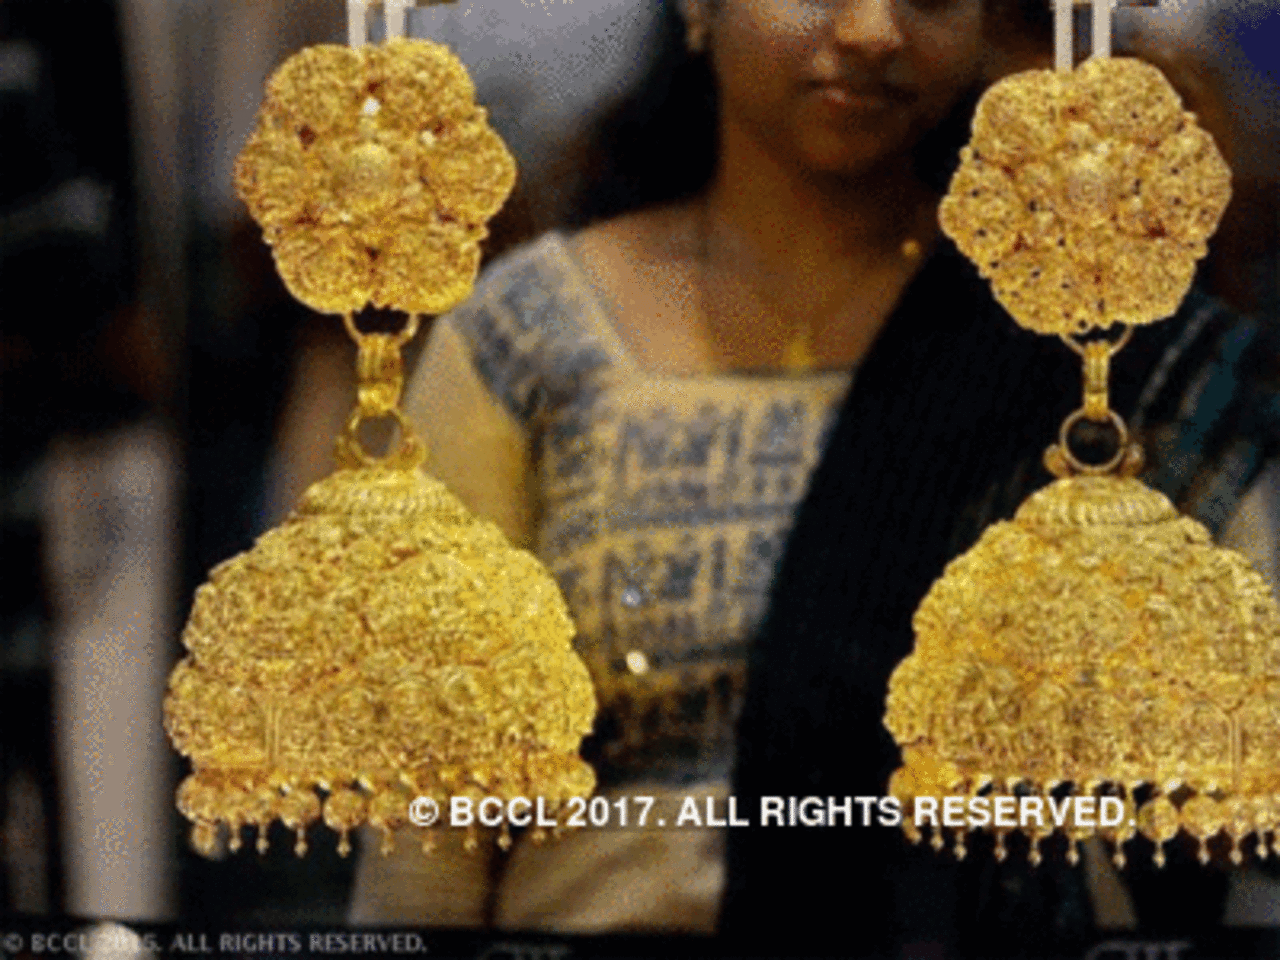 Hassles with melting your old gold jewellery - Times of India